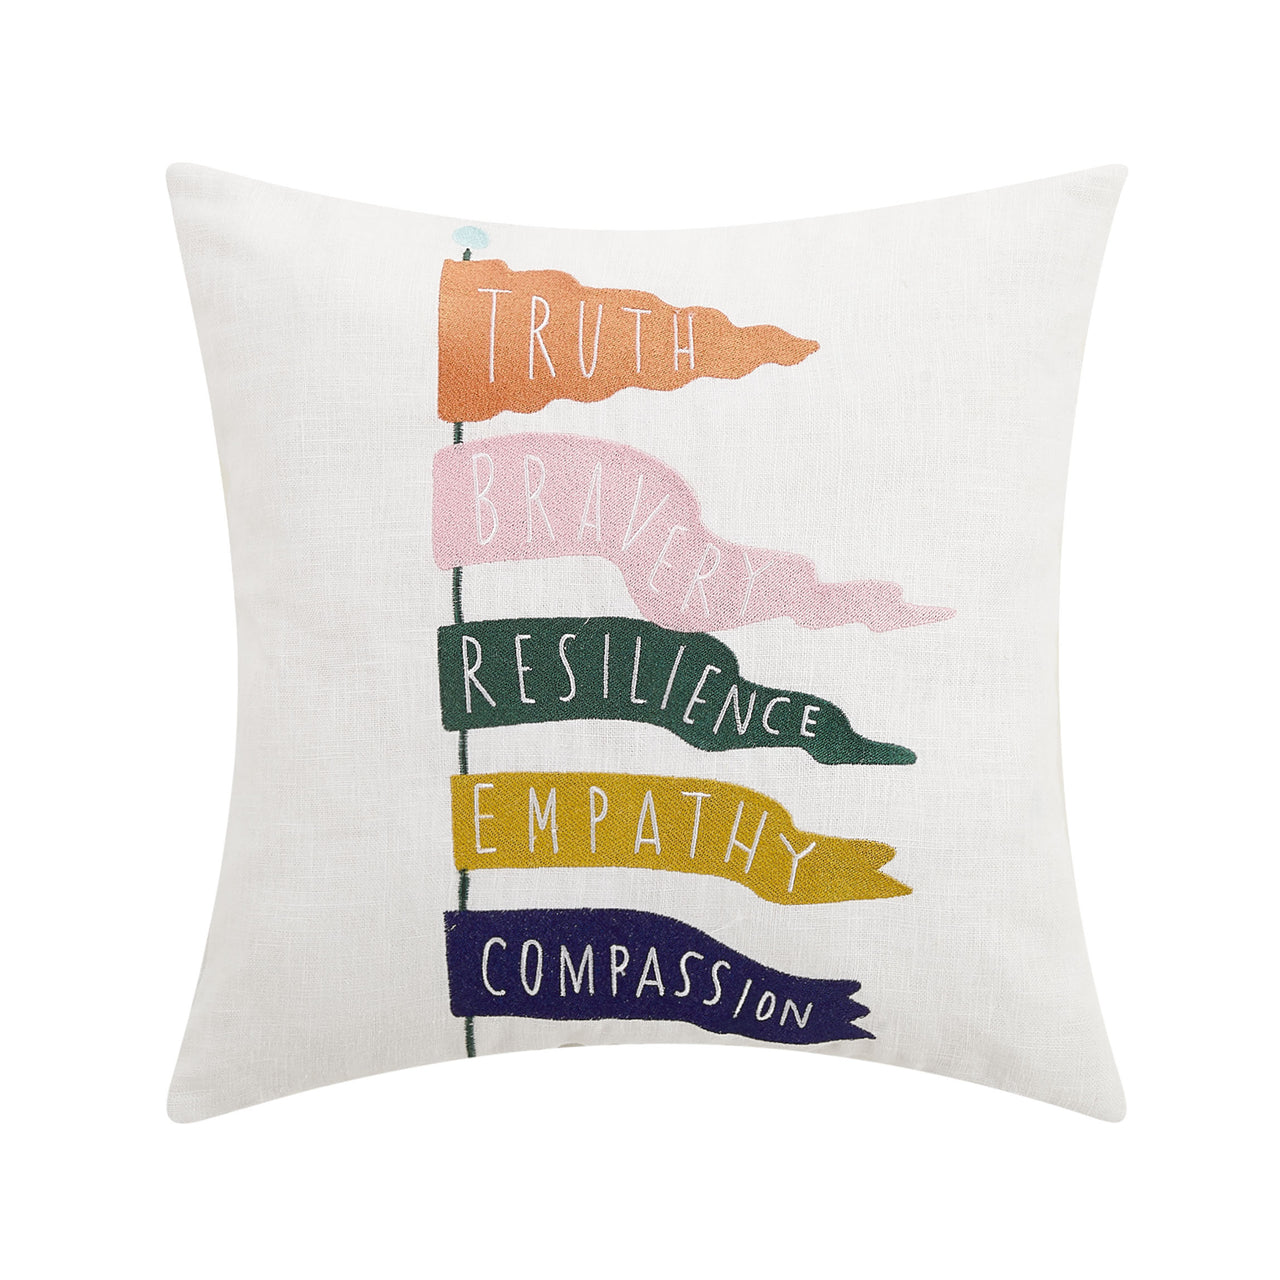 Positive Principles Embroidered Pillow, 16"x16"